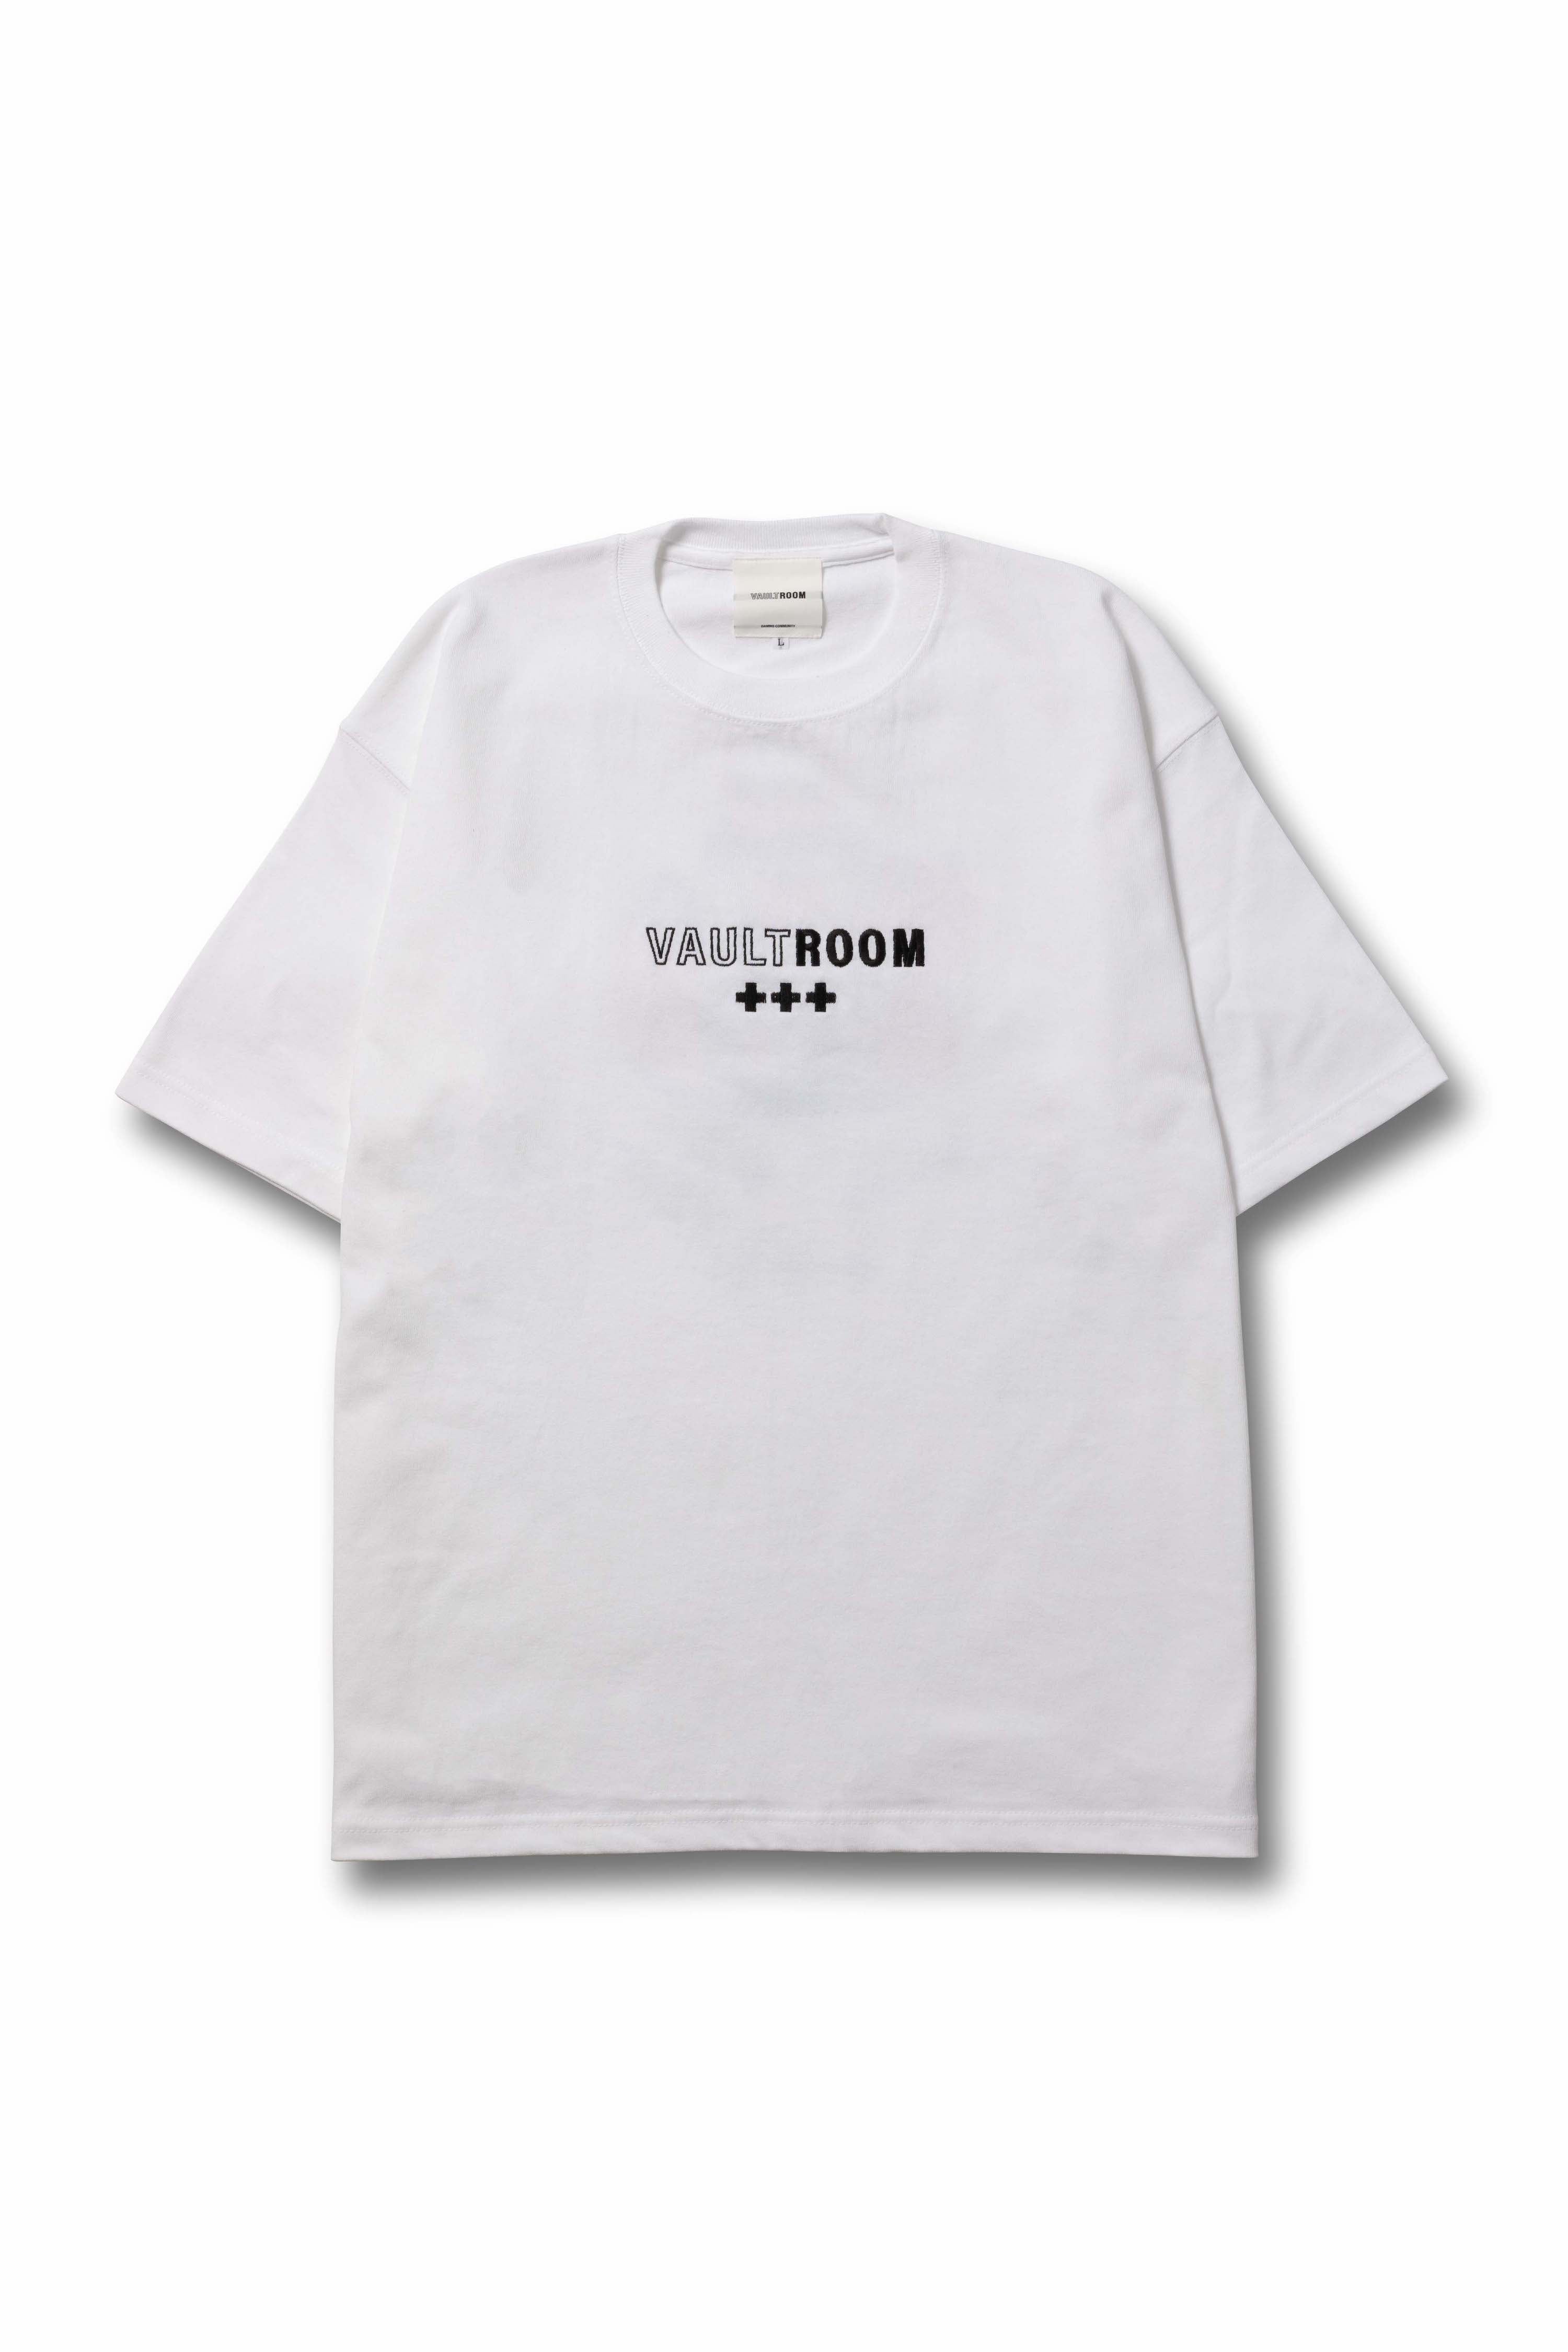 60％OFF VR CHARCOAL vaultroom LOWRIDER TEE TEE by / LOWRIDER ...